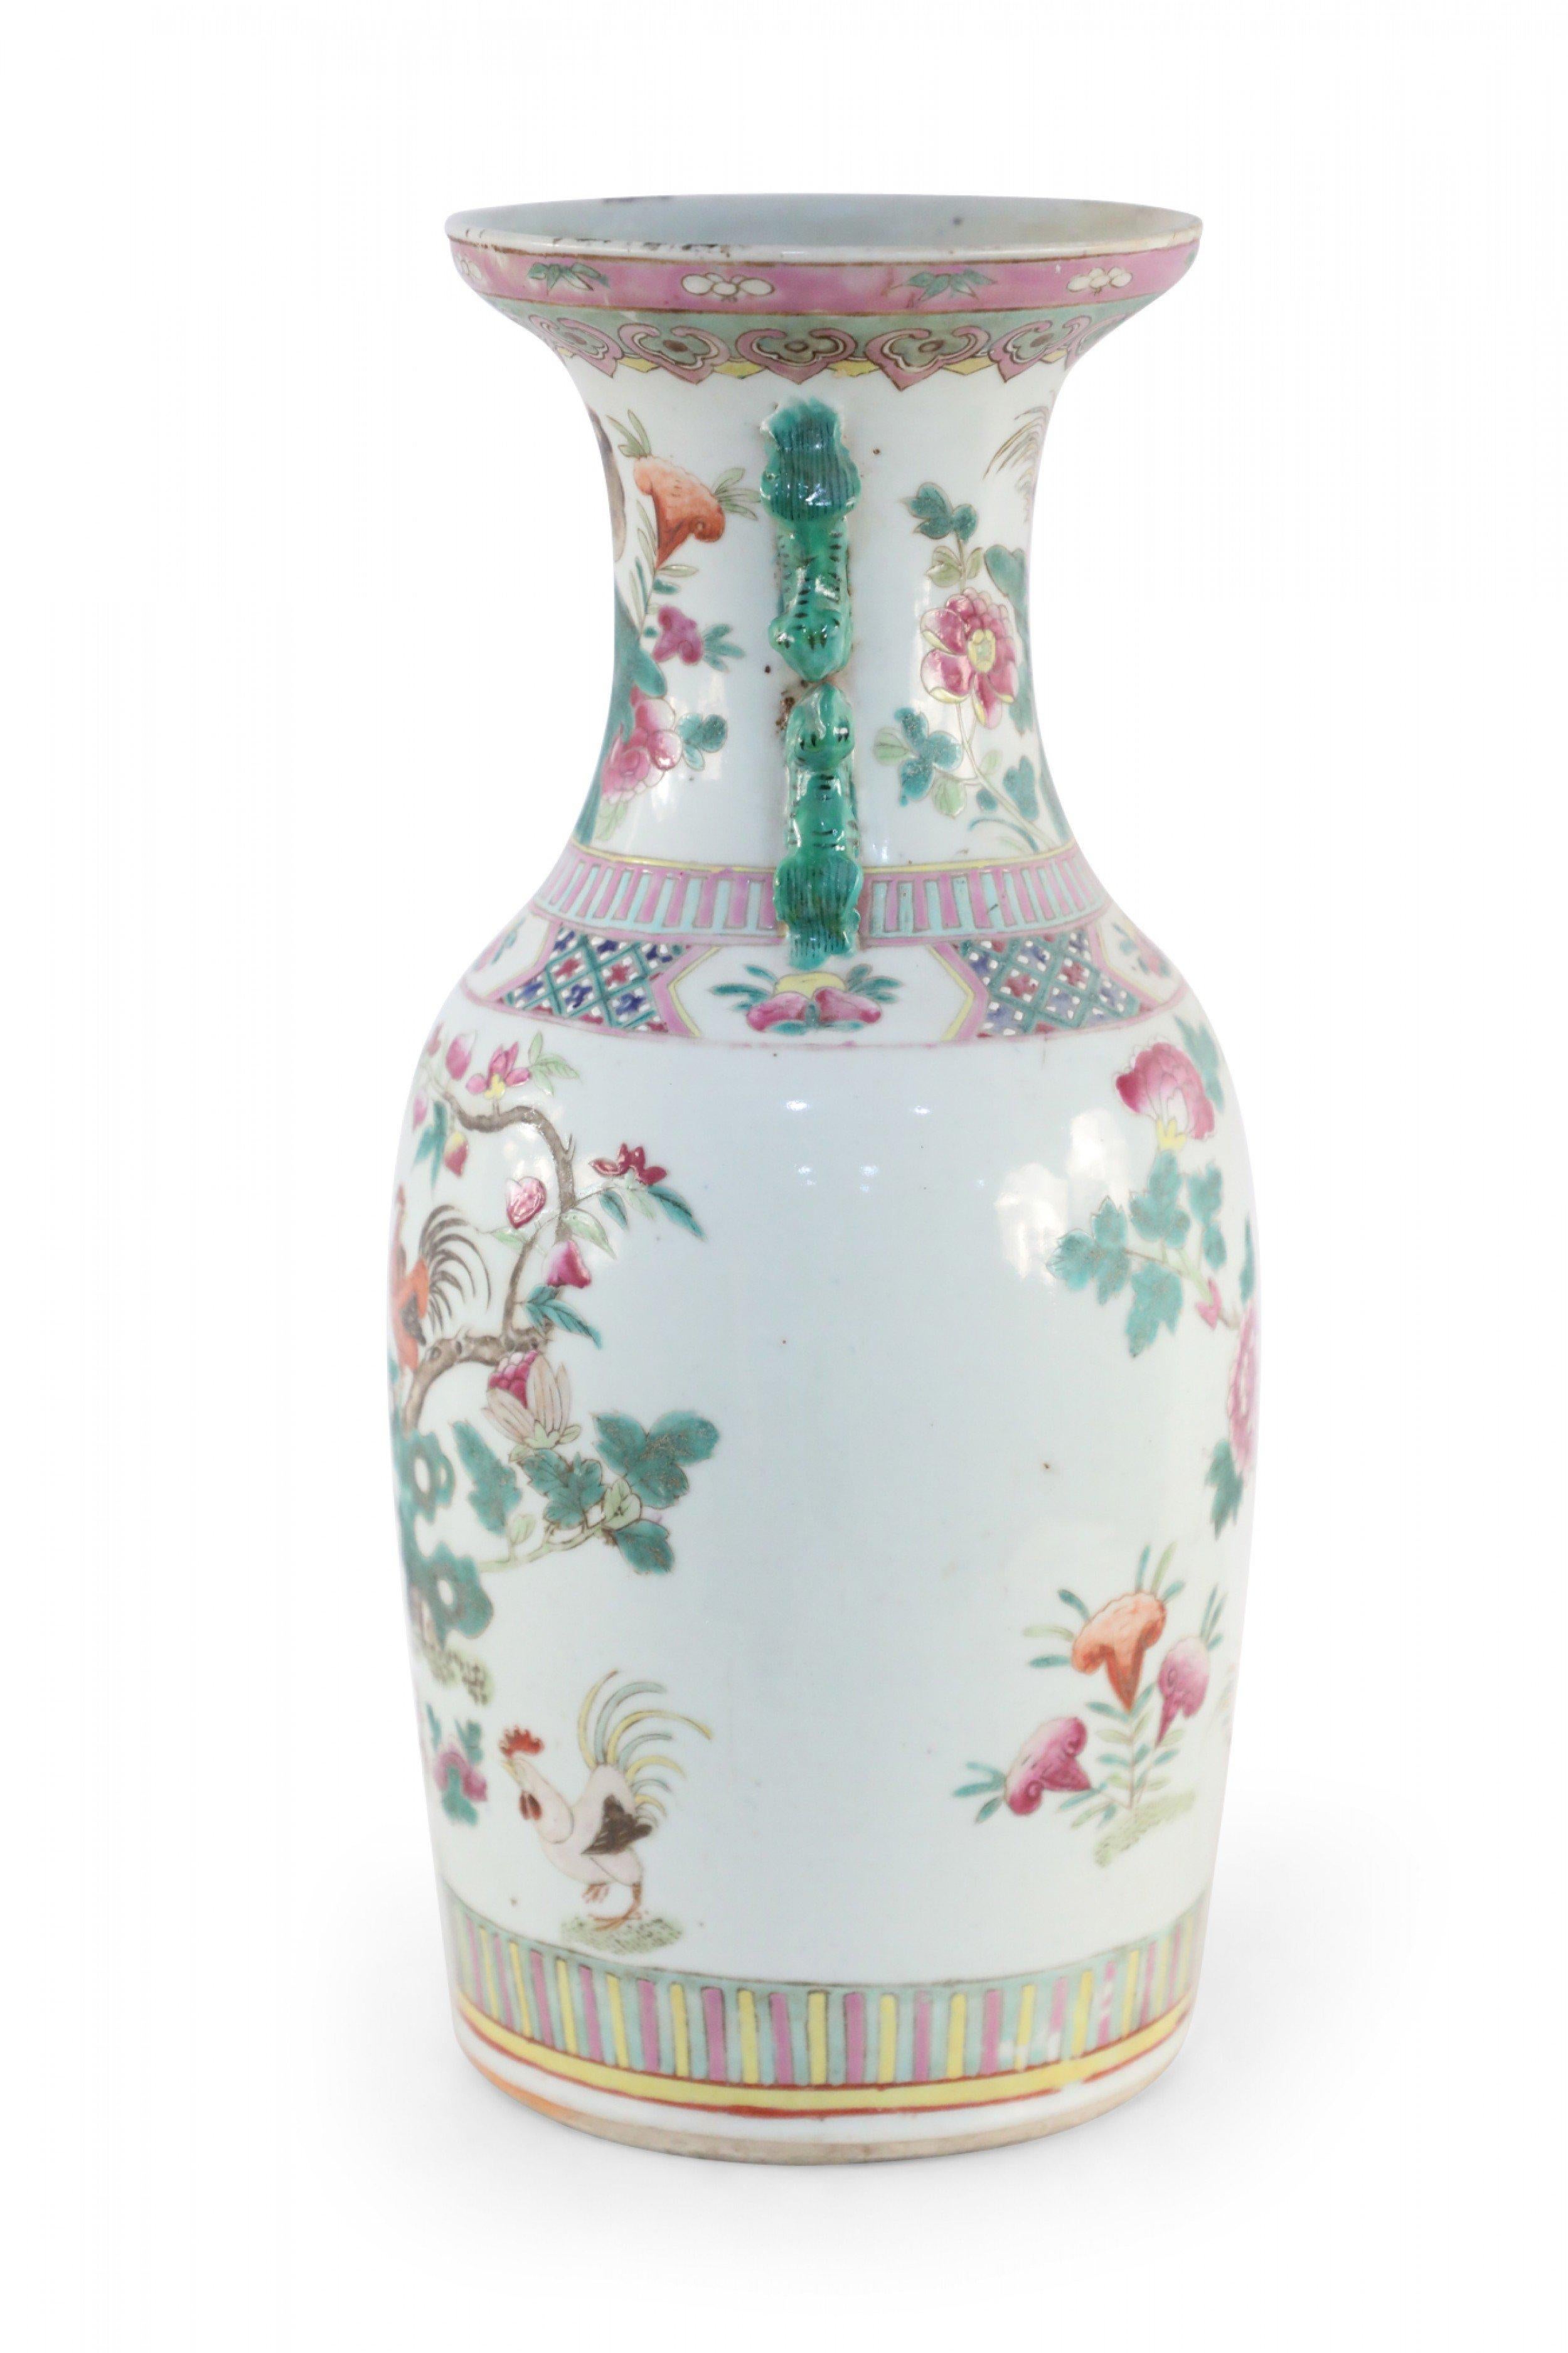 20th Century Chinese White, Green, and Pink Floral and Rooster Design Porcelain Urn For Sale